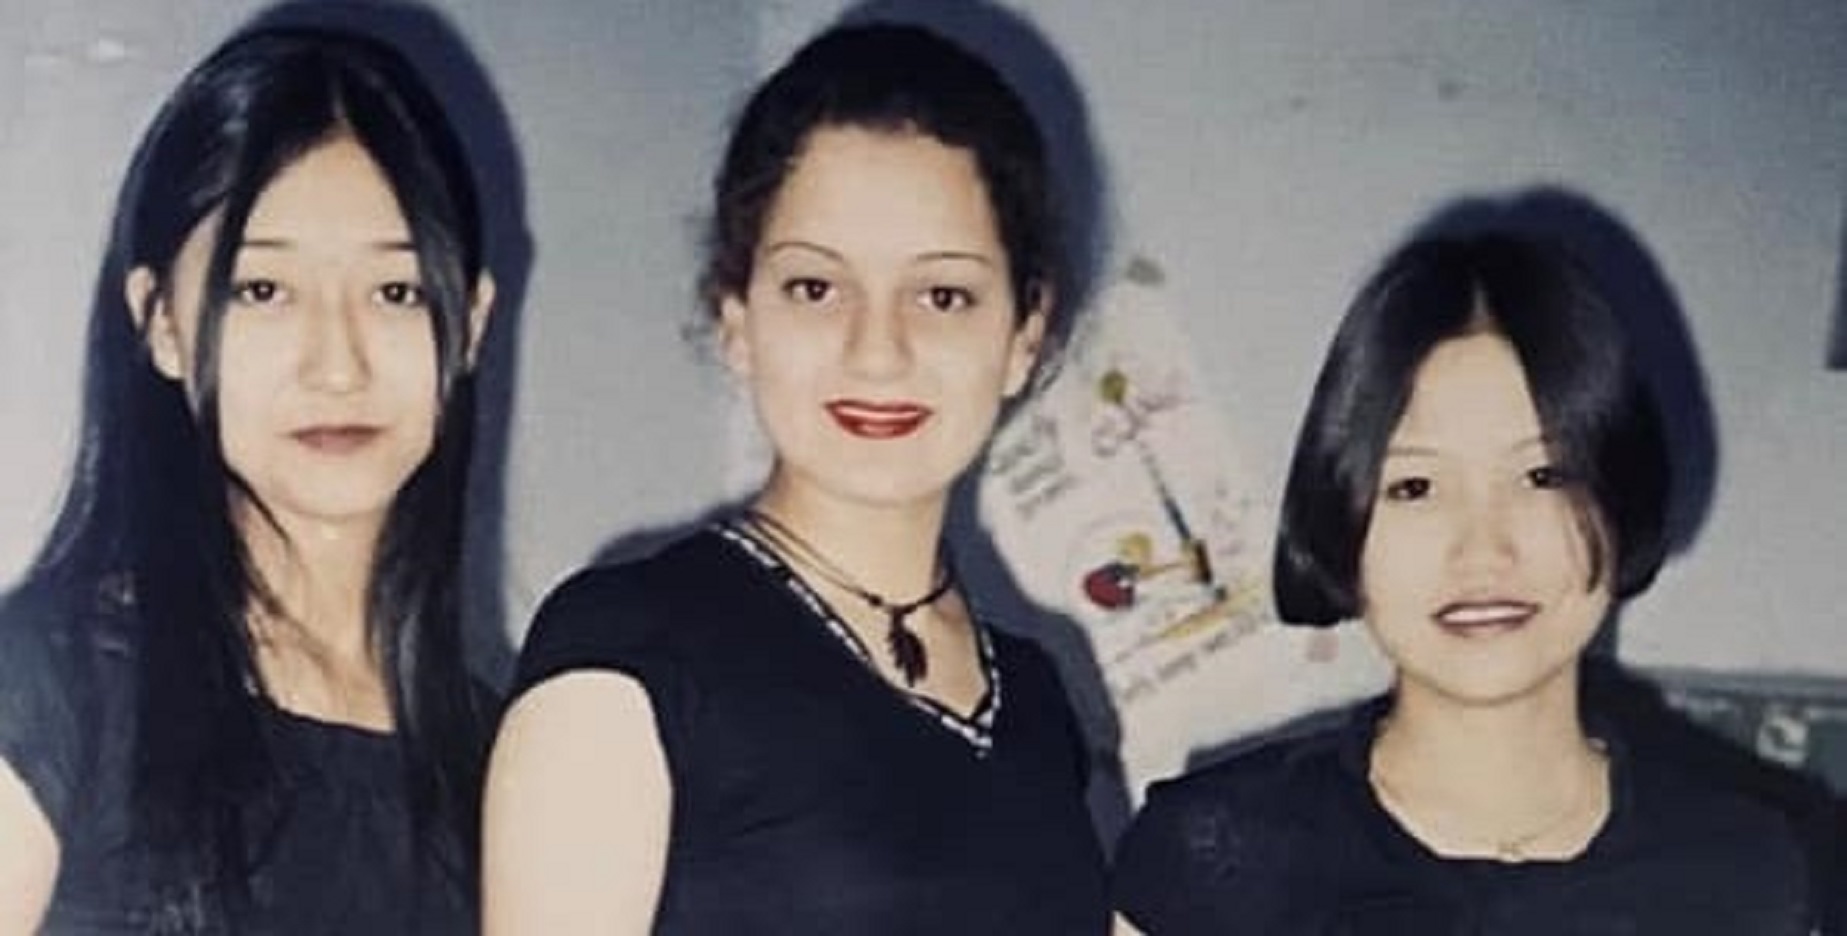 Kangana Ranaut Shares Rare Pictures From Her Teenage Years In Boarding School, “We were called Charlie’s Angles”